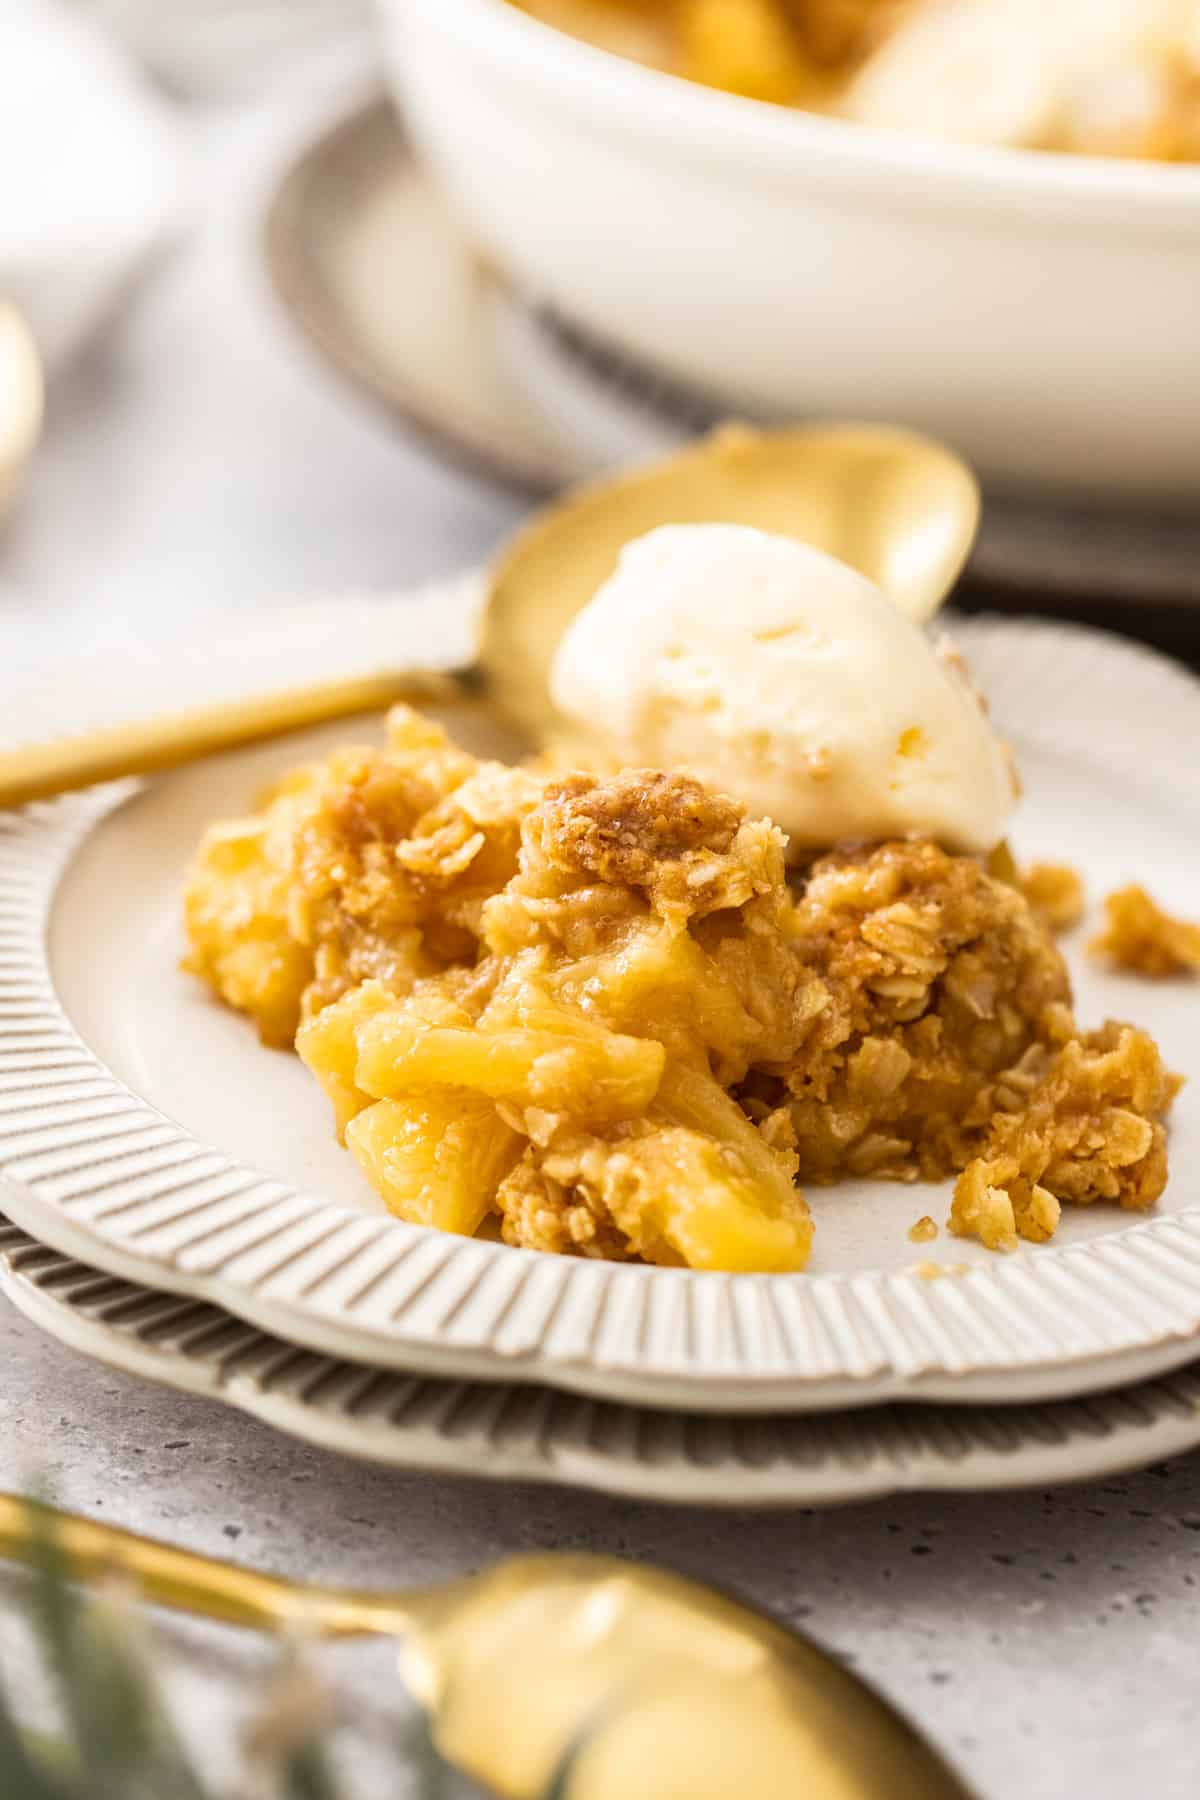 Serve of Pineapple Crisp, on a round white plate, with a scoop of ice cream and spoon on the side.